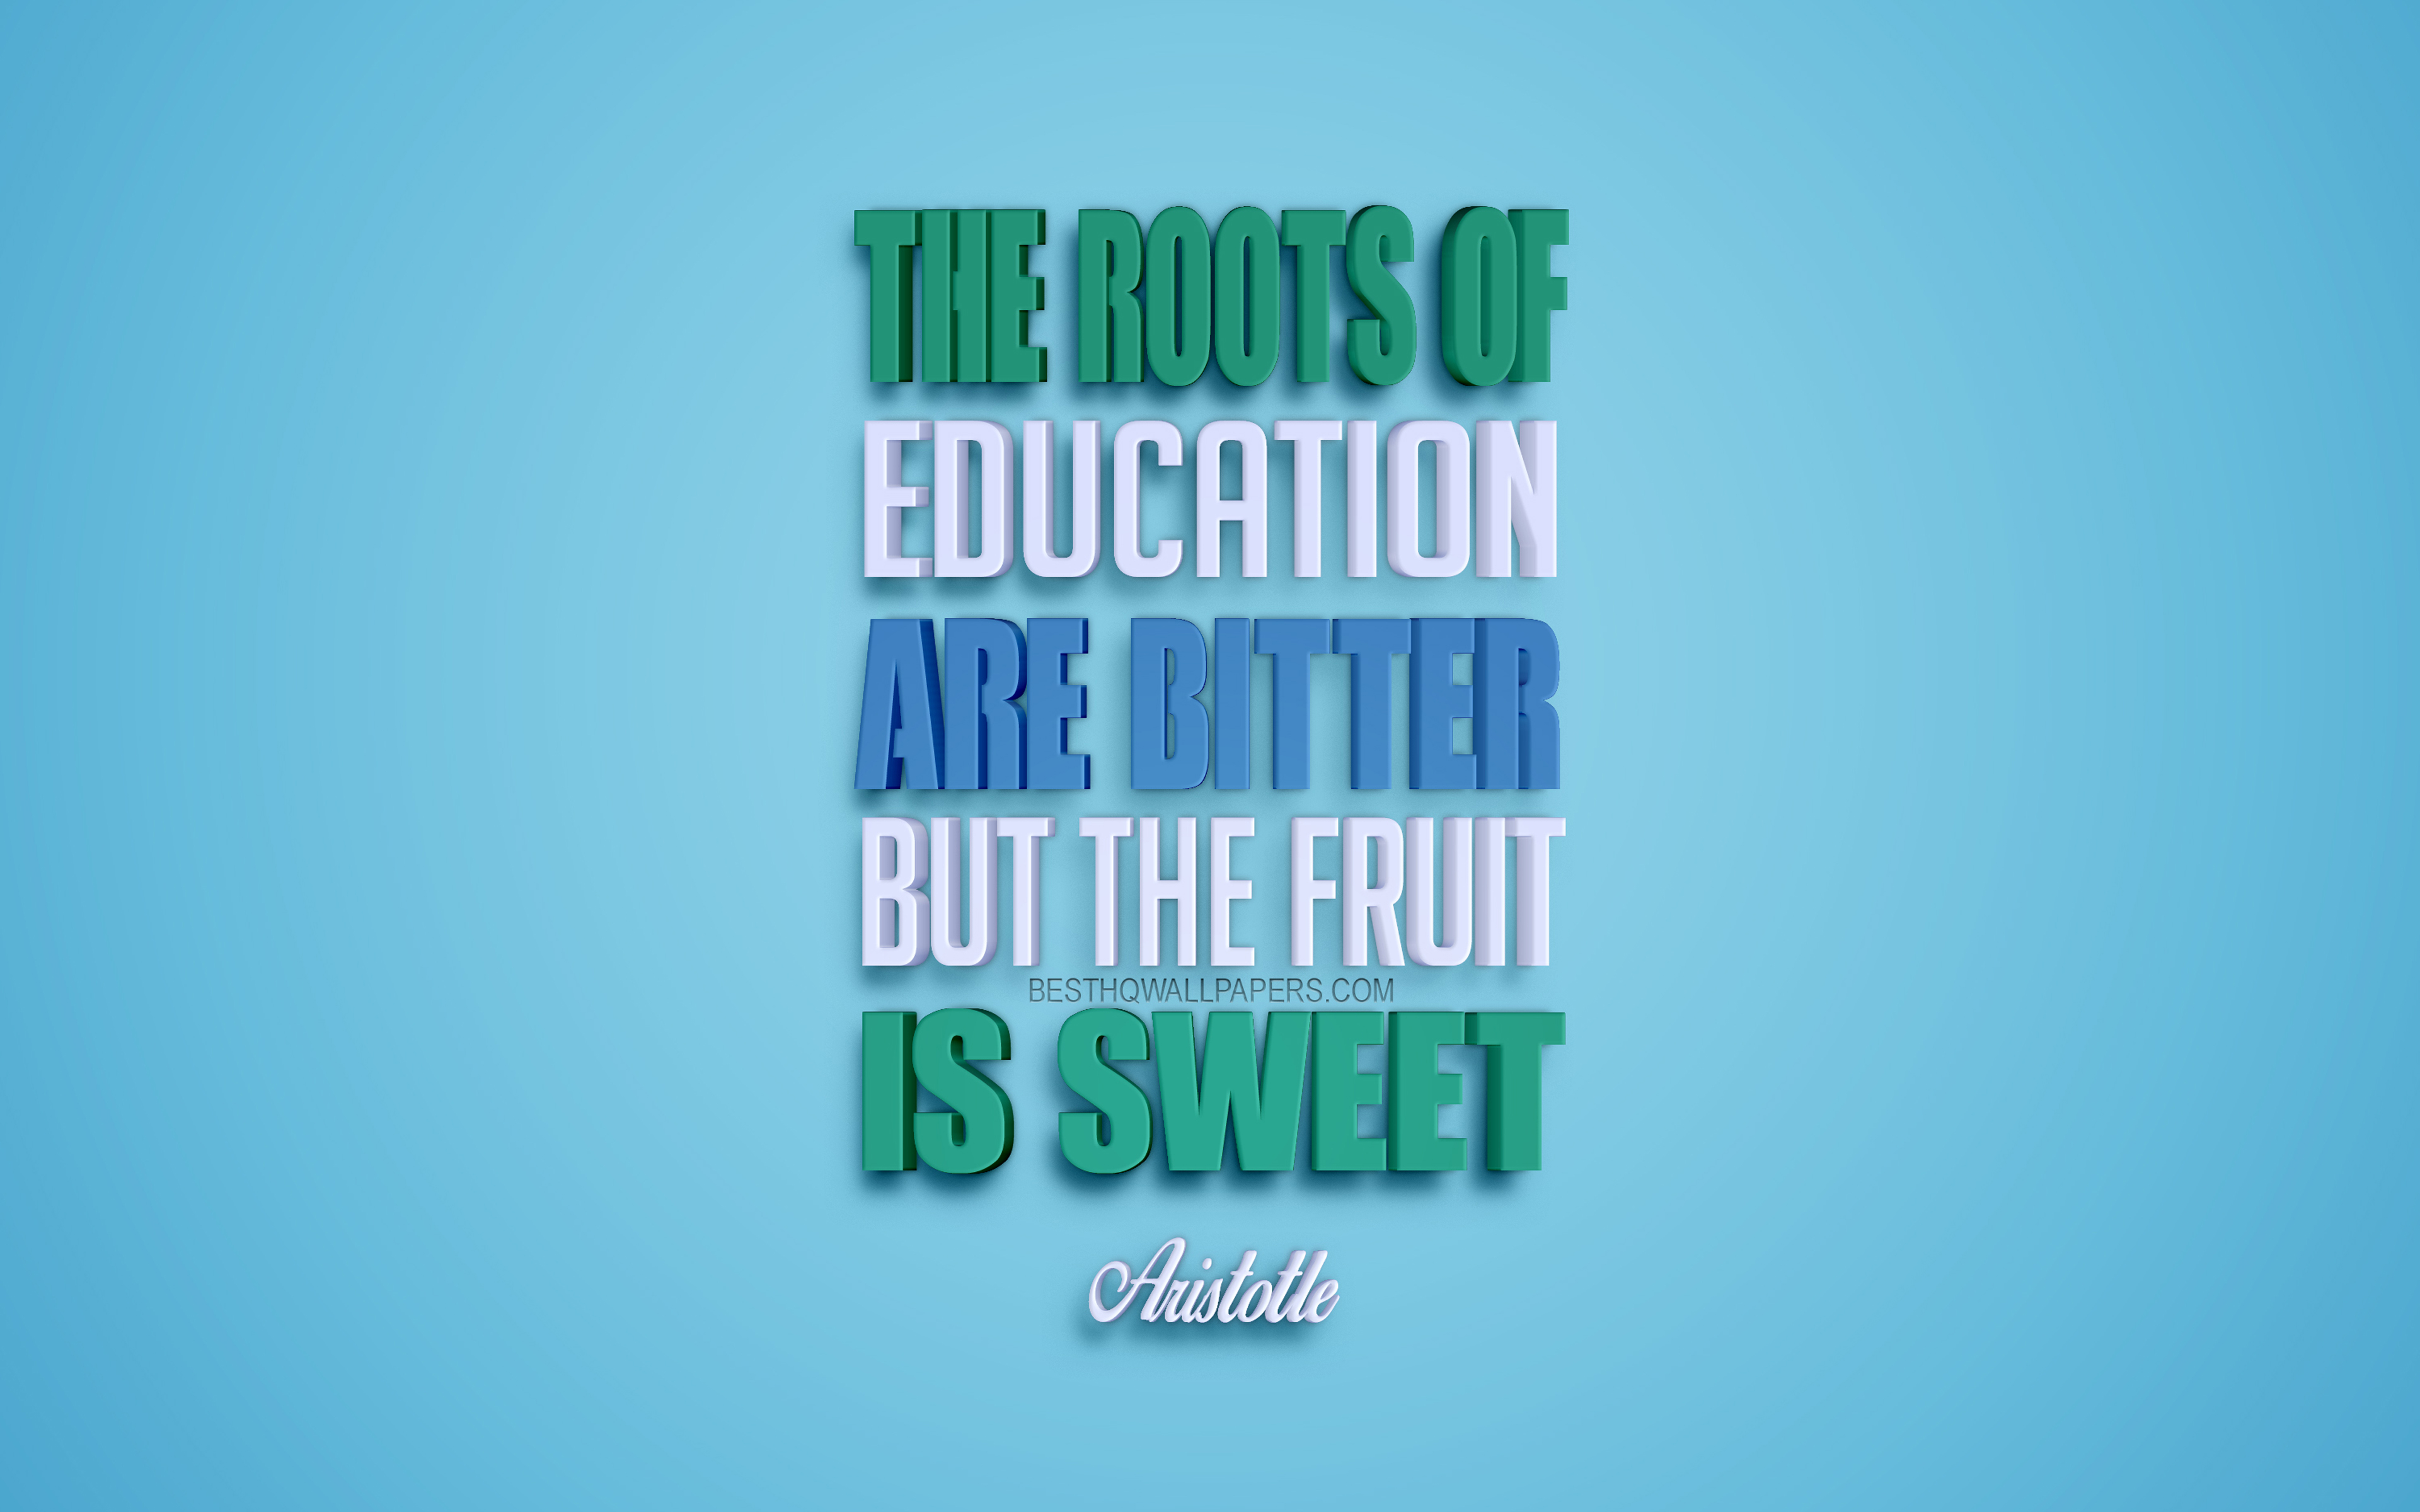 Download wallpaper The roots of education are bitter but the fruit is sweet, Aristotle quotes, blue background, creative 3D art, motivation quotes, inspiration, popular quotes for desktop with resolution 3840x2400. High Quality